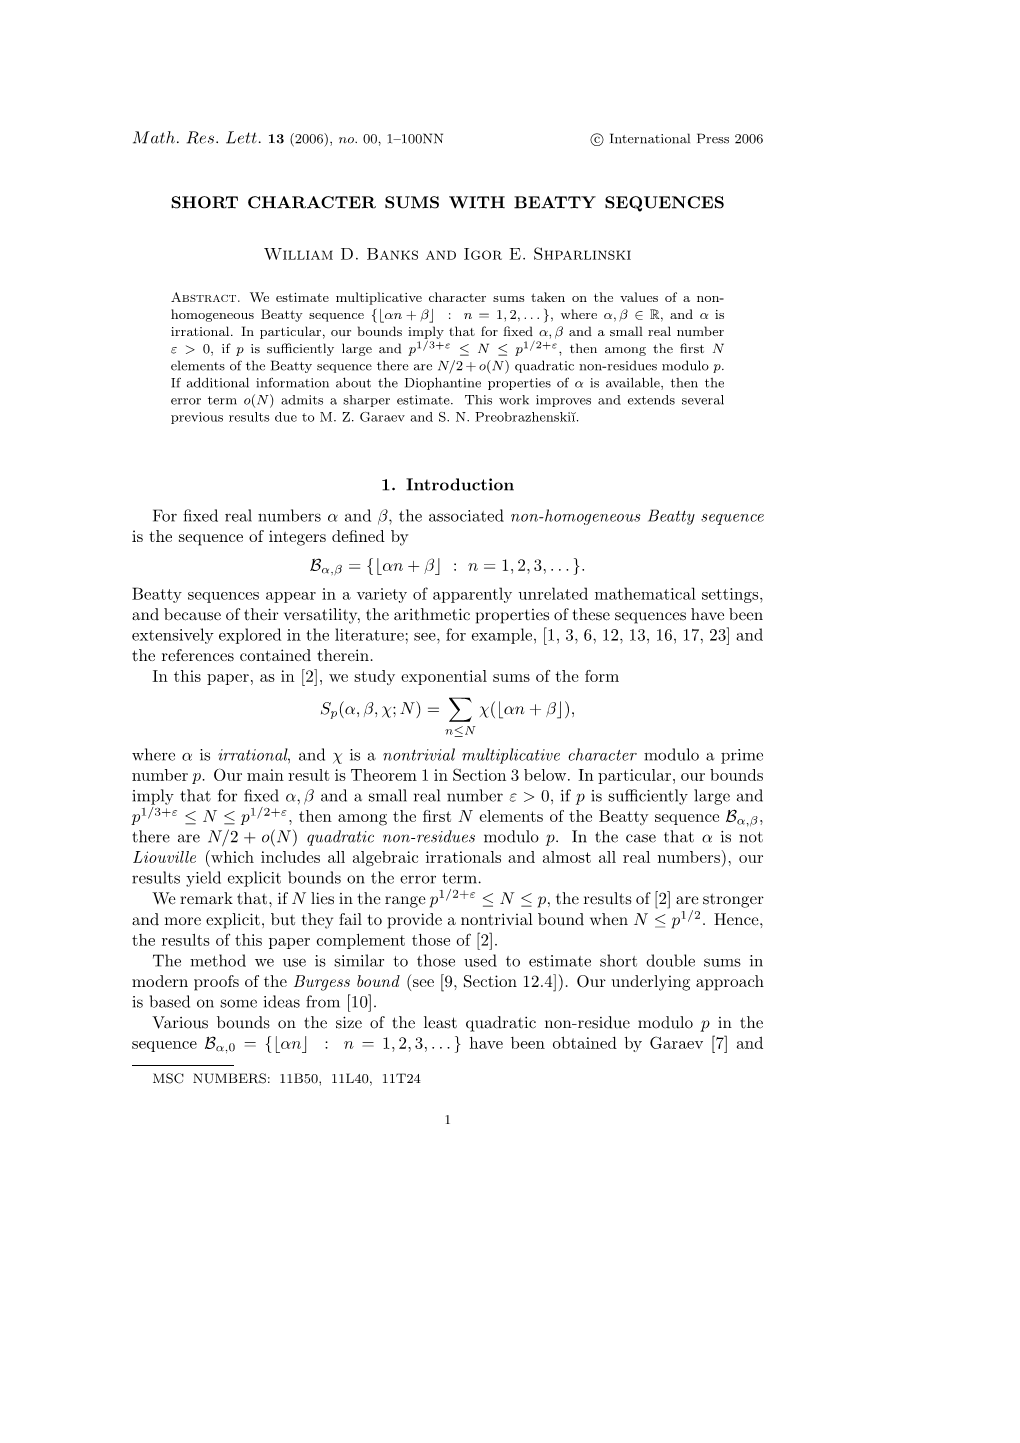 SHORT CHARACTER SUMS with BEATTY SEQUENCES William D. Banks and Igor E. Shparlinski 1. Introduction for Fixed Real Numbers Α An